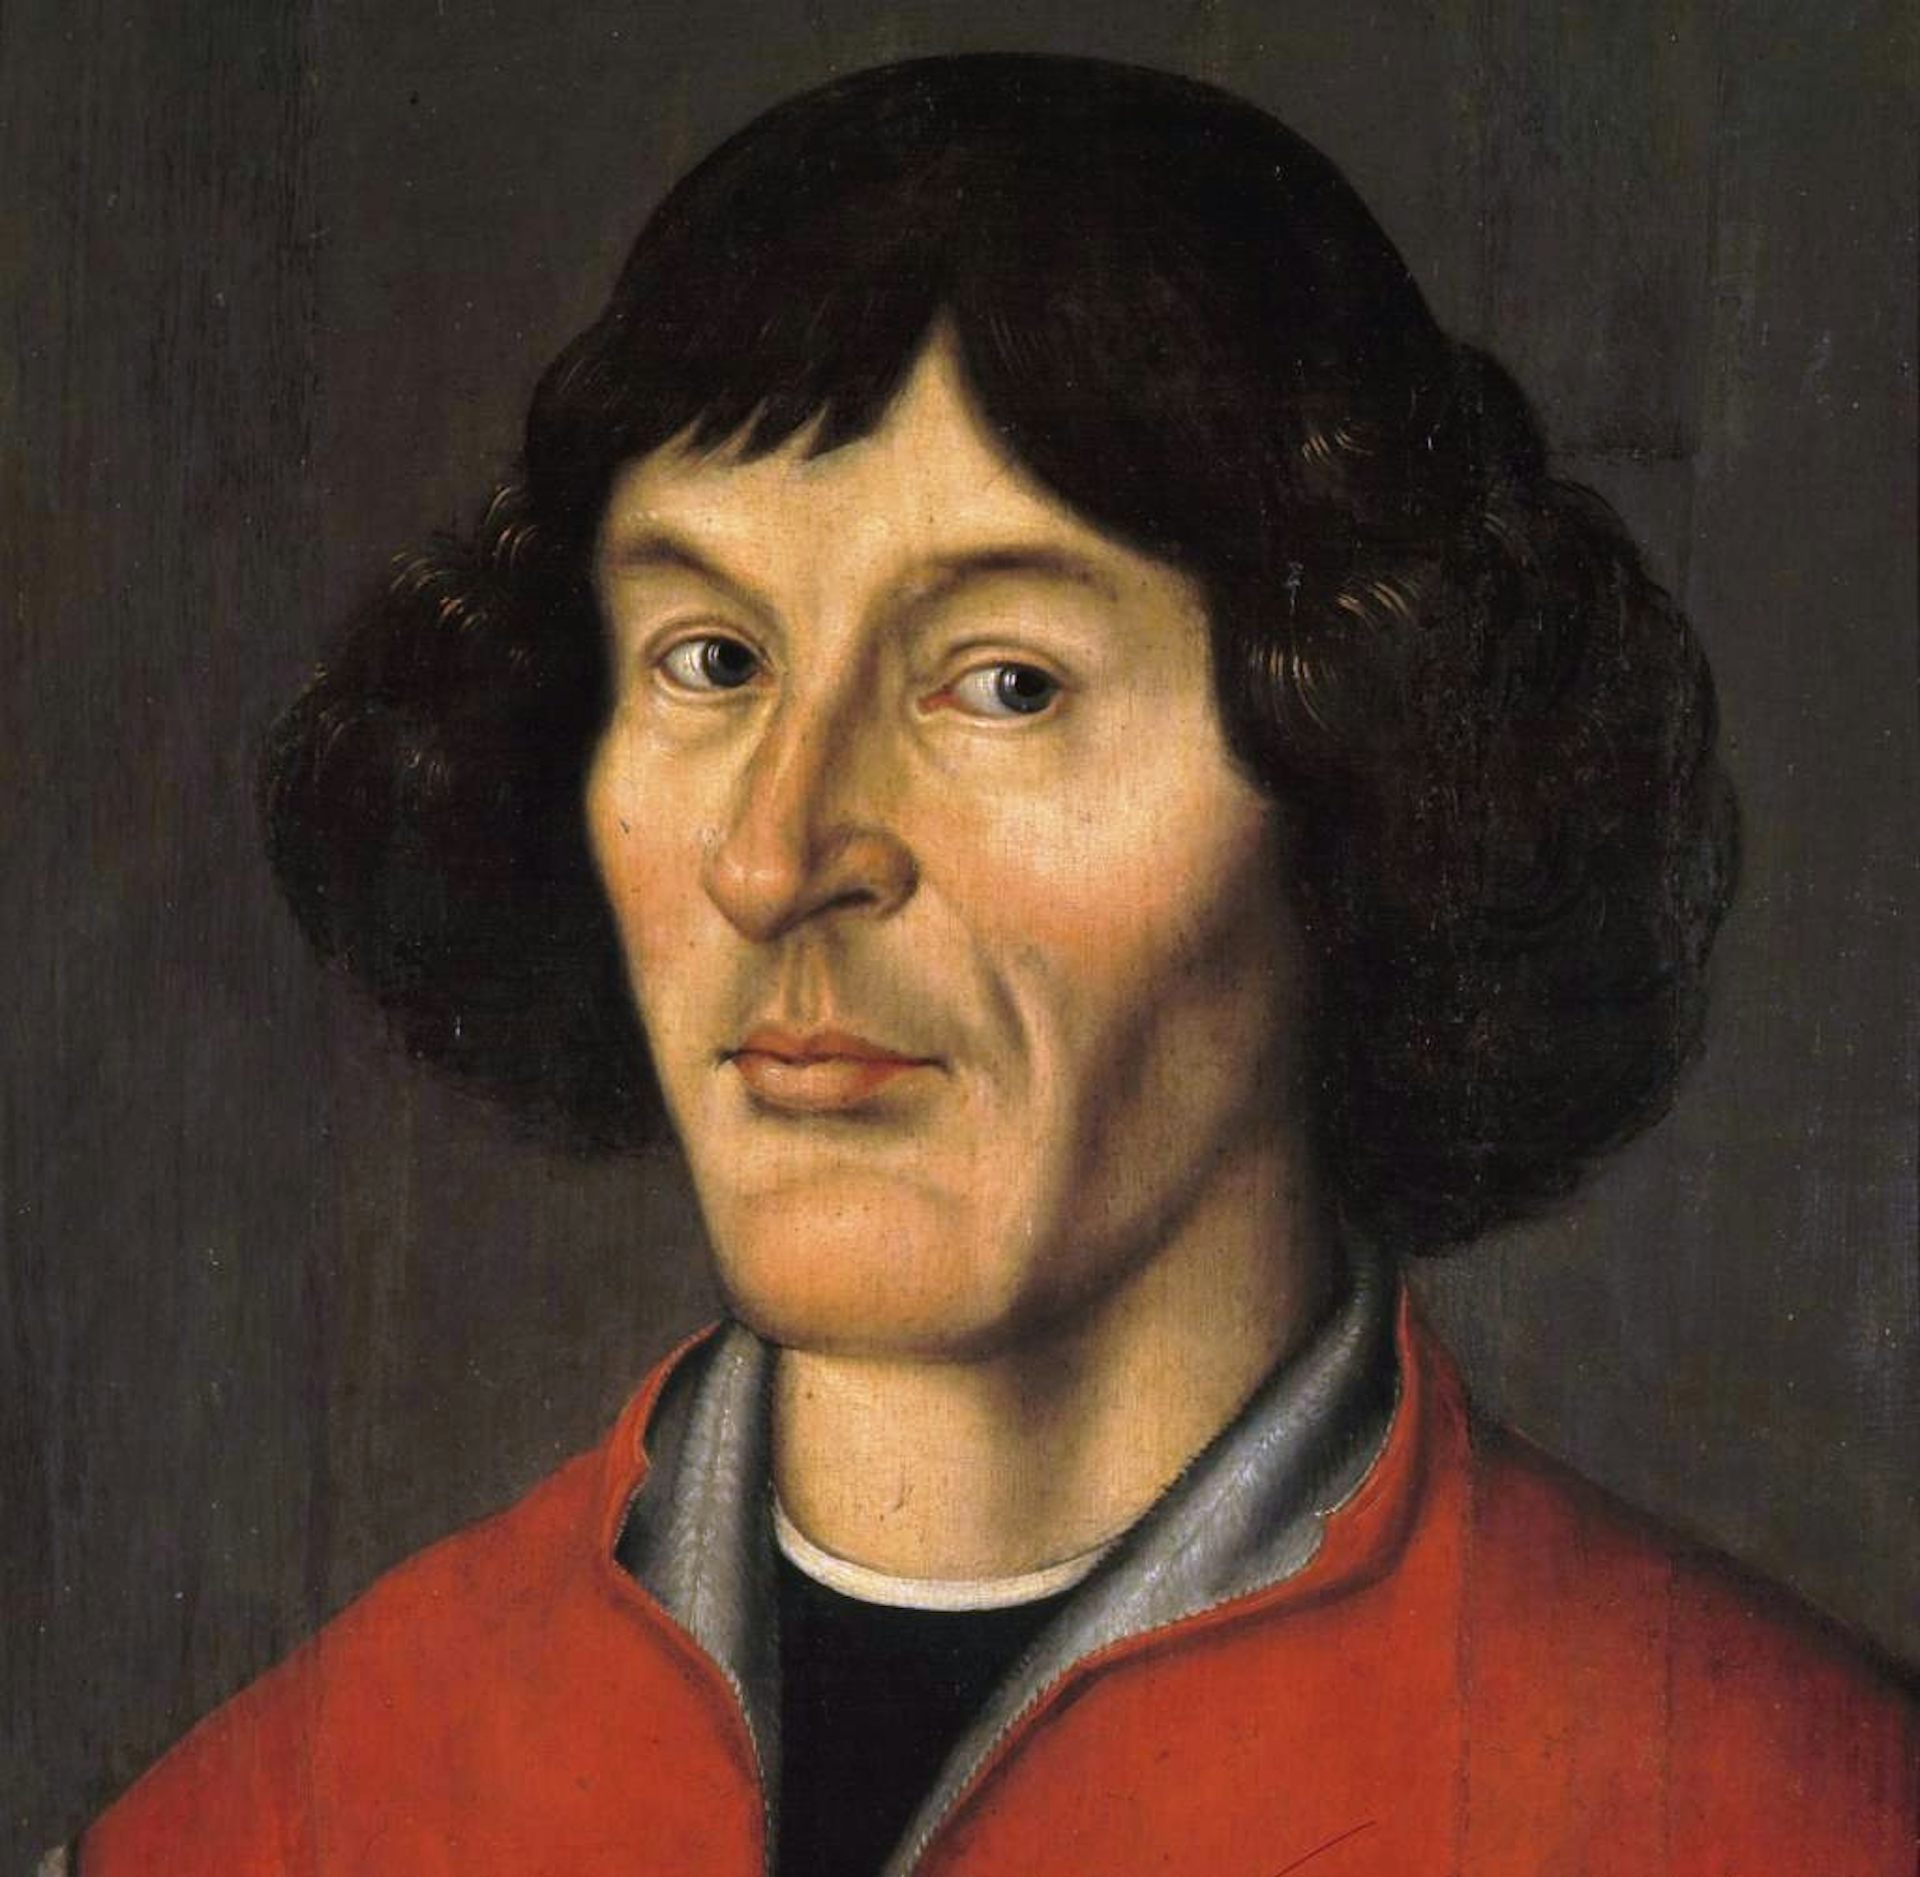 Closeup of a man in a red jacket, with longish hair and looking determined.